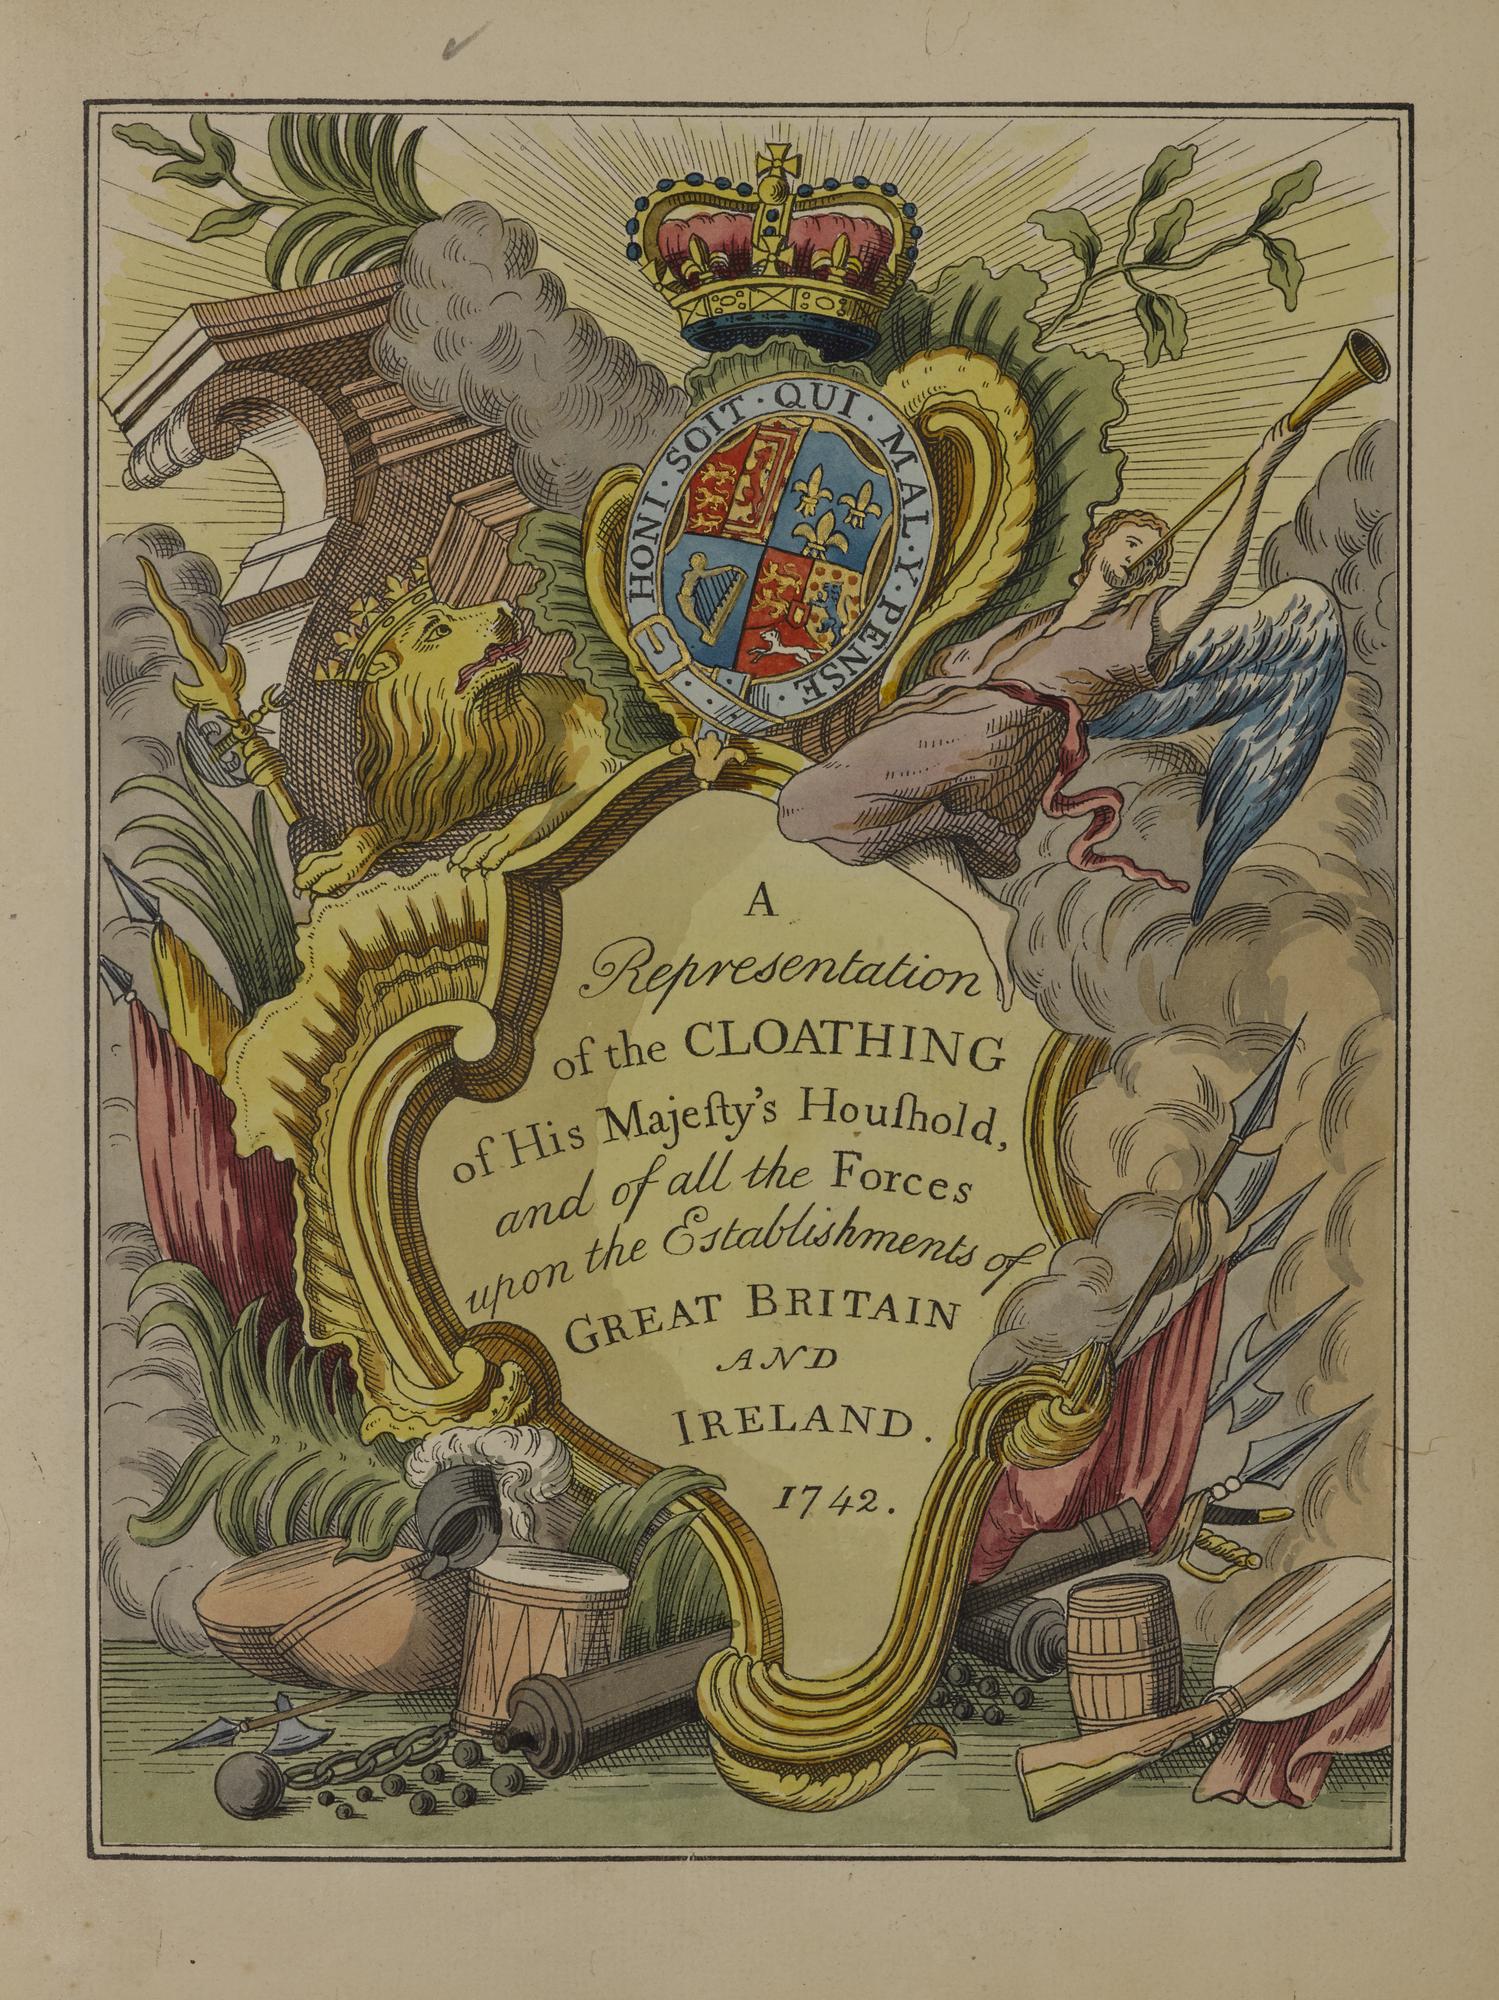 Title page from the book A Representation of the cloathing of His Majesty's household and of all the Forces upon the establishments of Great Britain and Ireland, 1742.